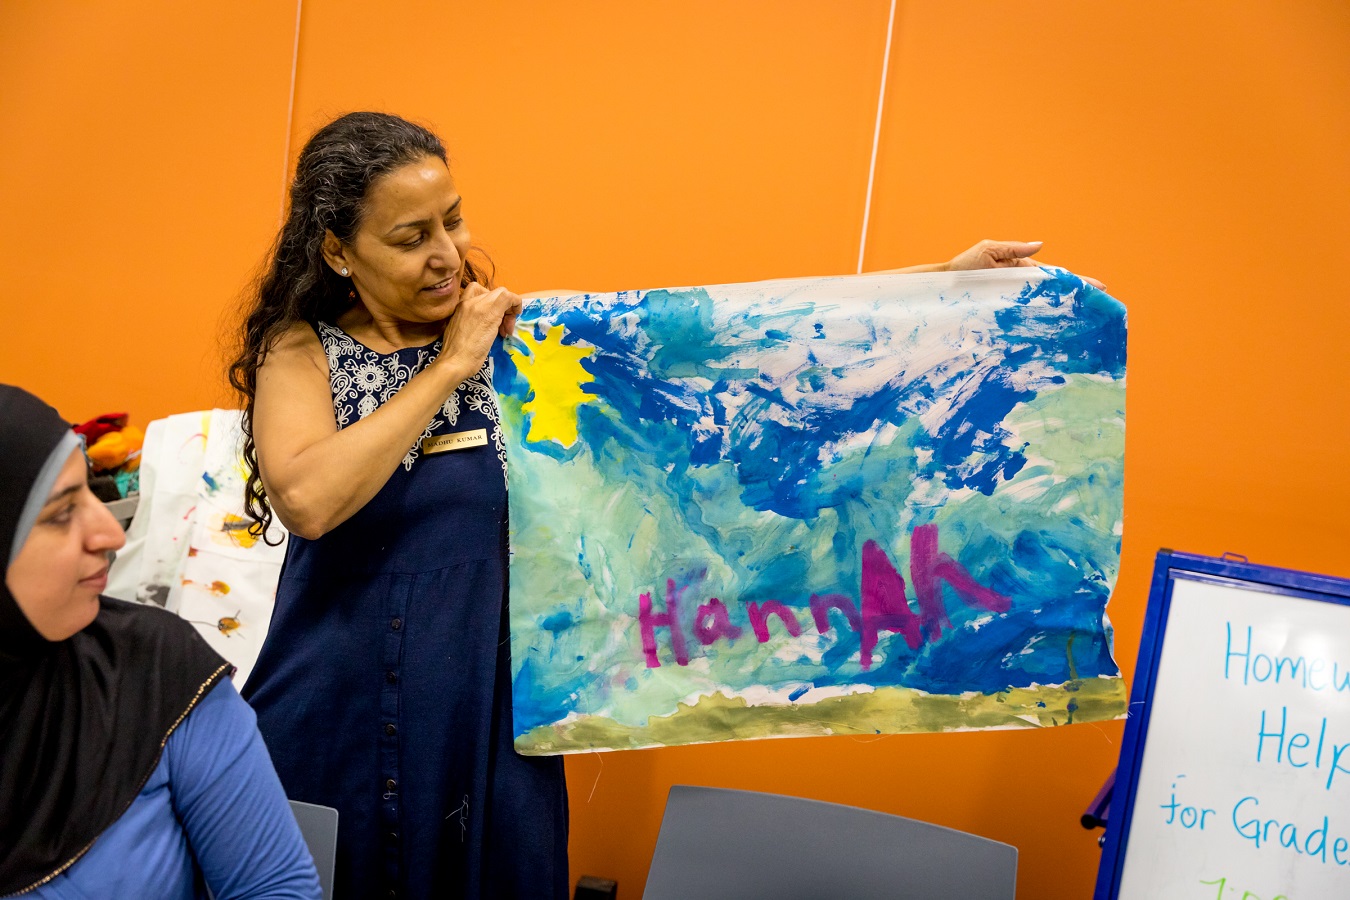 Madhu Kumar holds up a colourful painting by one of the participants in her art sessions at Dunlop Art Gallery.